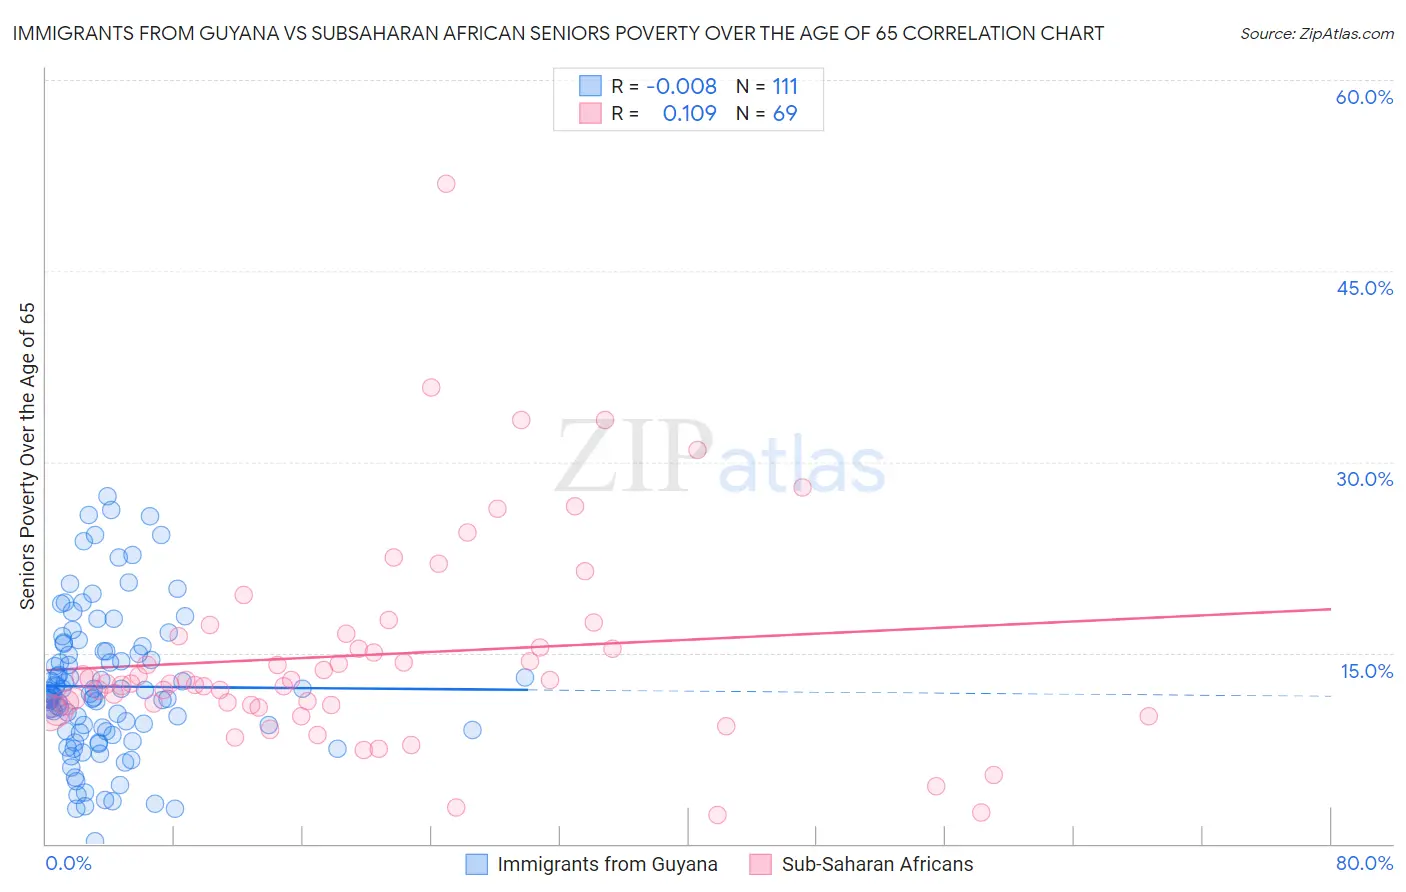 Immigrants from Guyana vs Subsaharan African Seniors Poverty Over the Age of 65